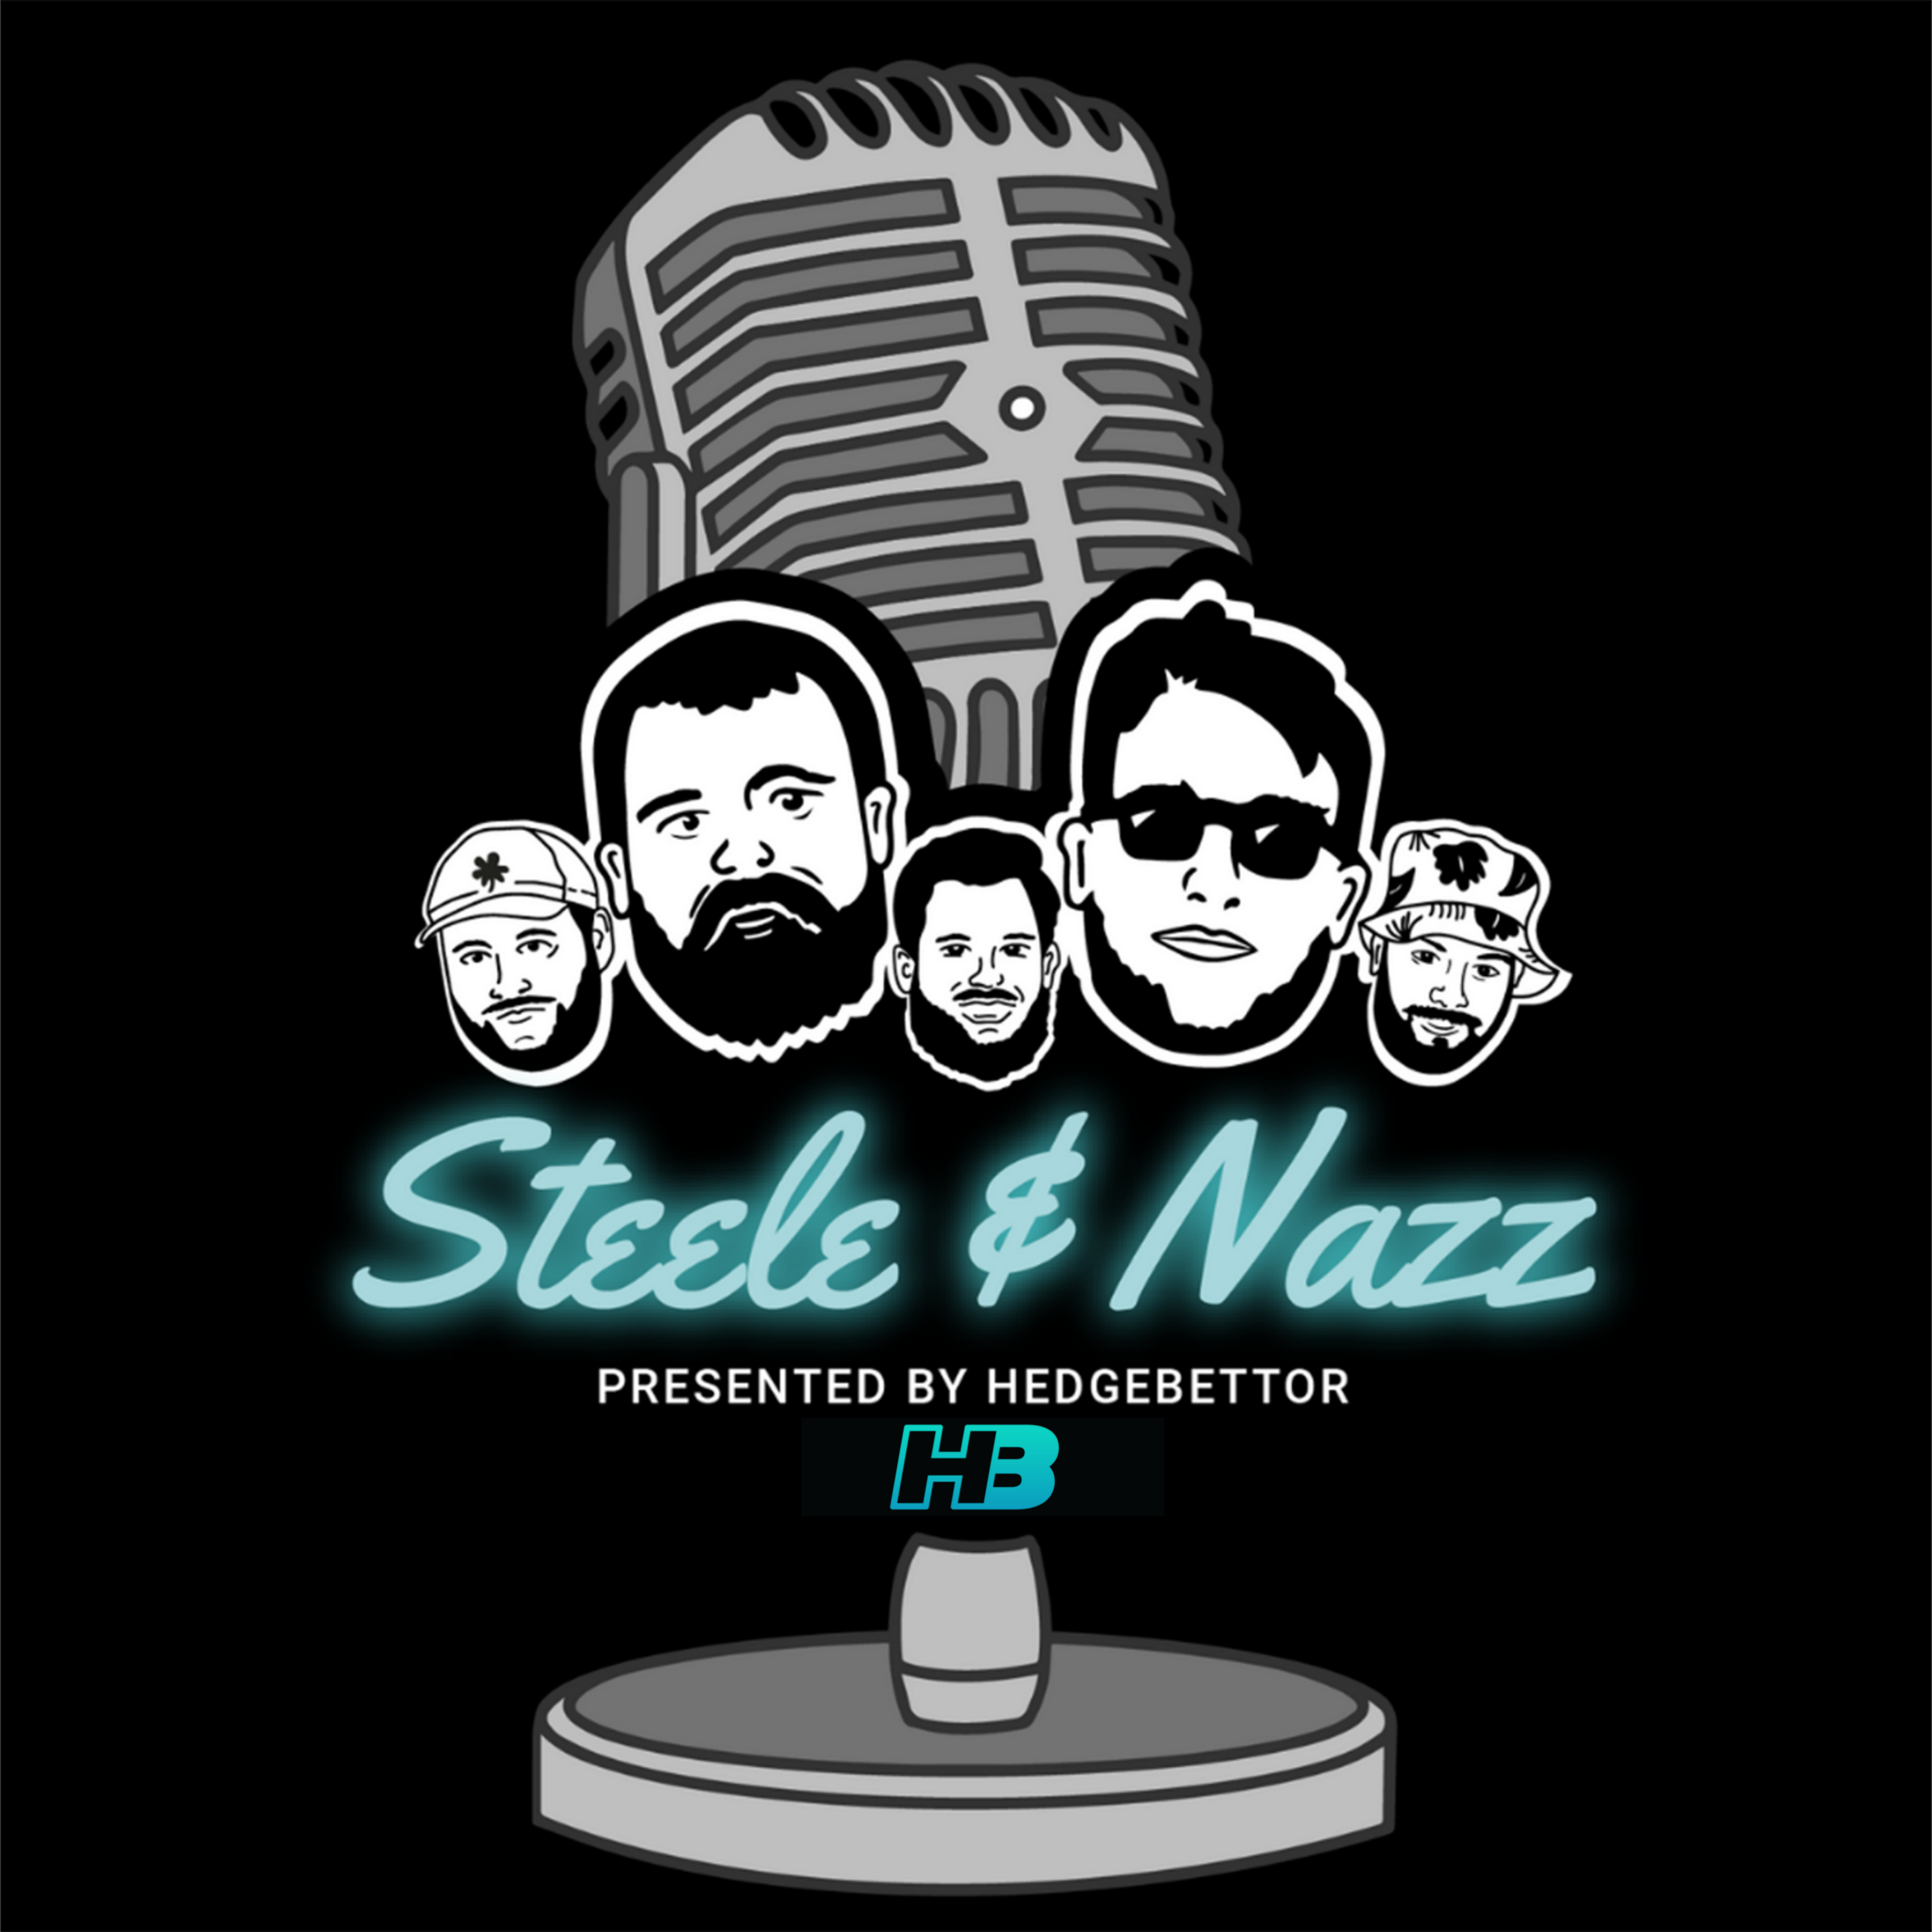 Ep. 106 - Steele & Nazz Awards, can the Patriots make the playoffs?